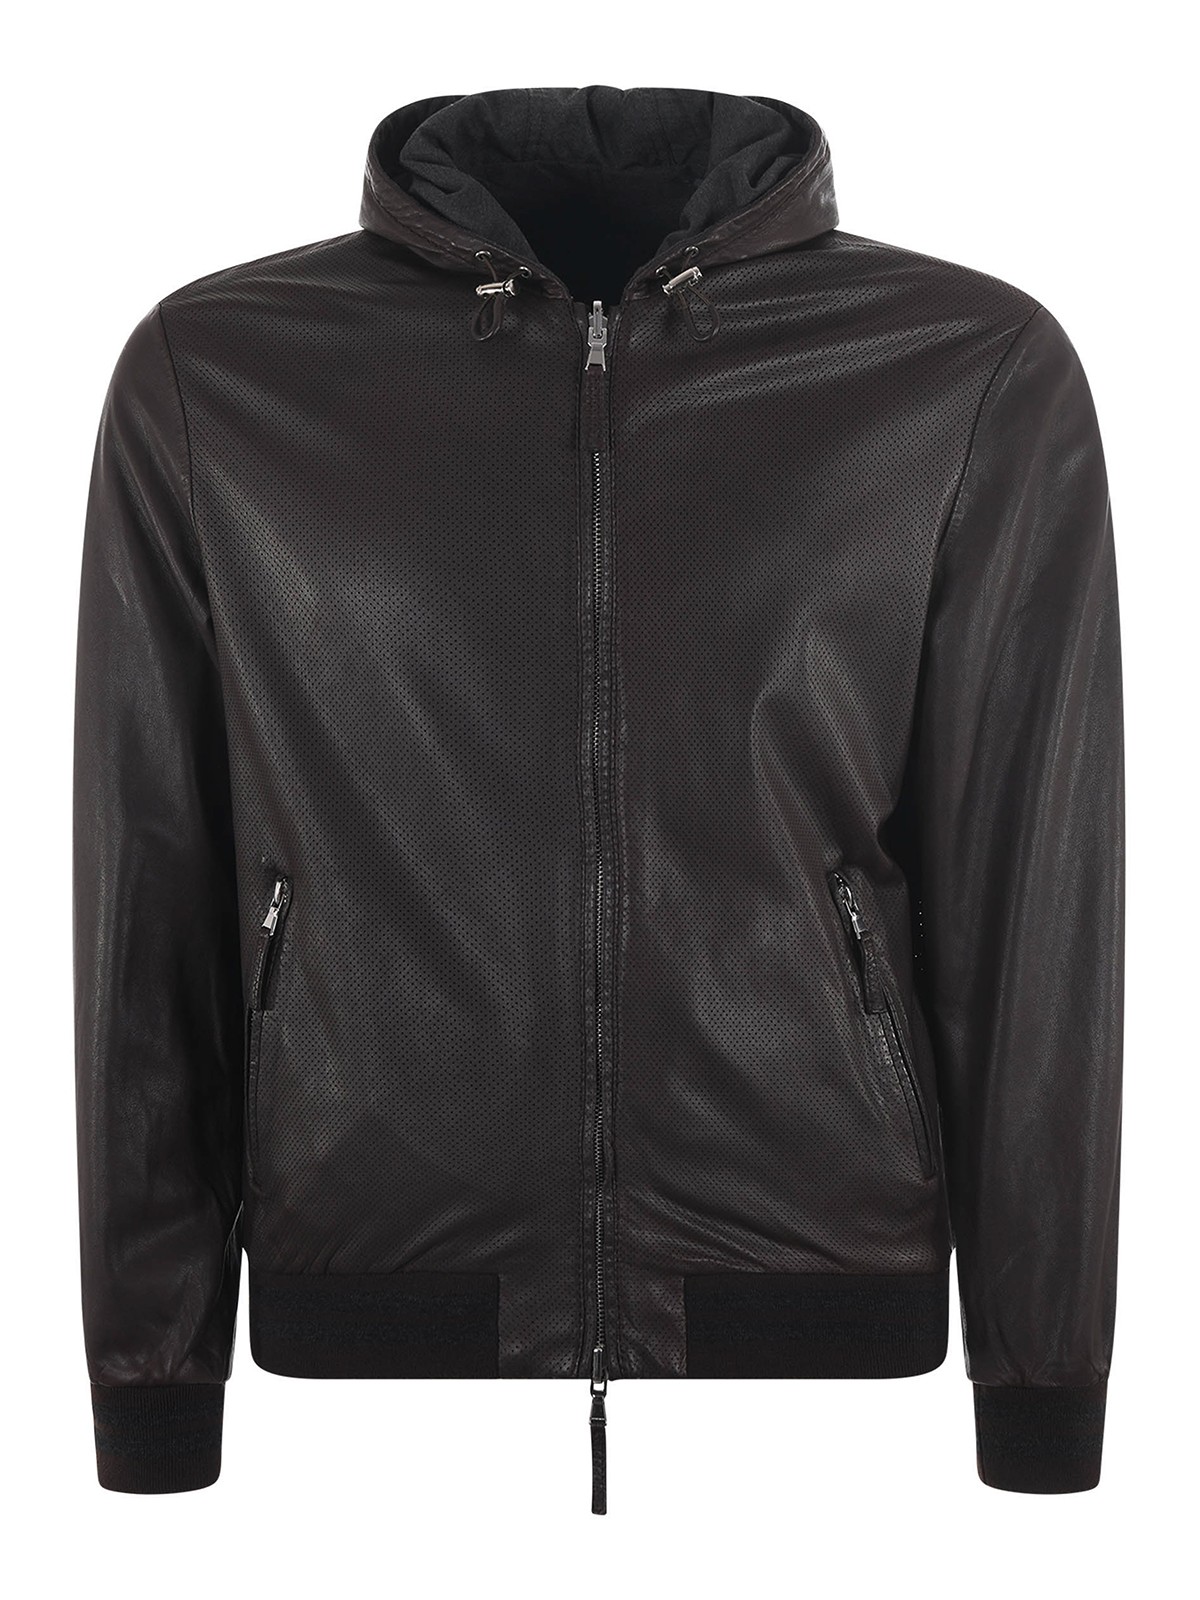 Shop The Jack Leathers Reversible Jacket In Brown